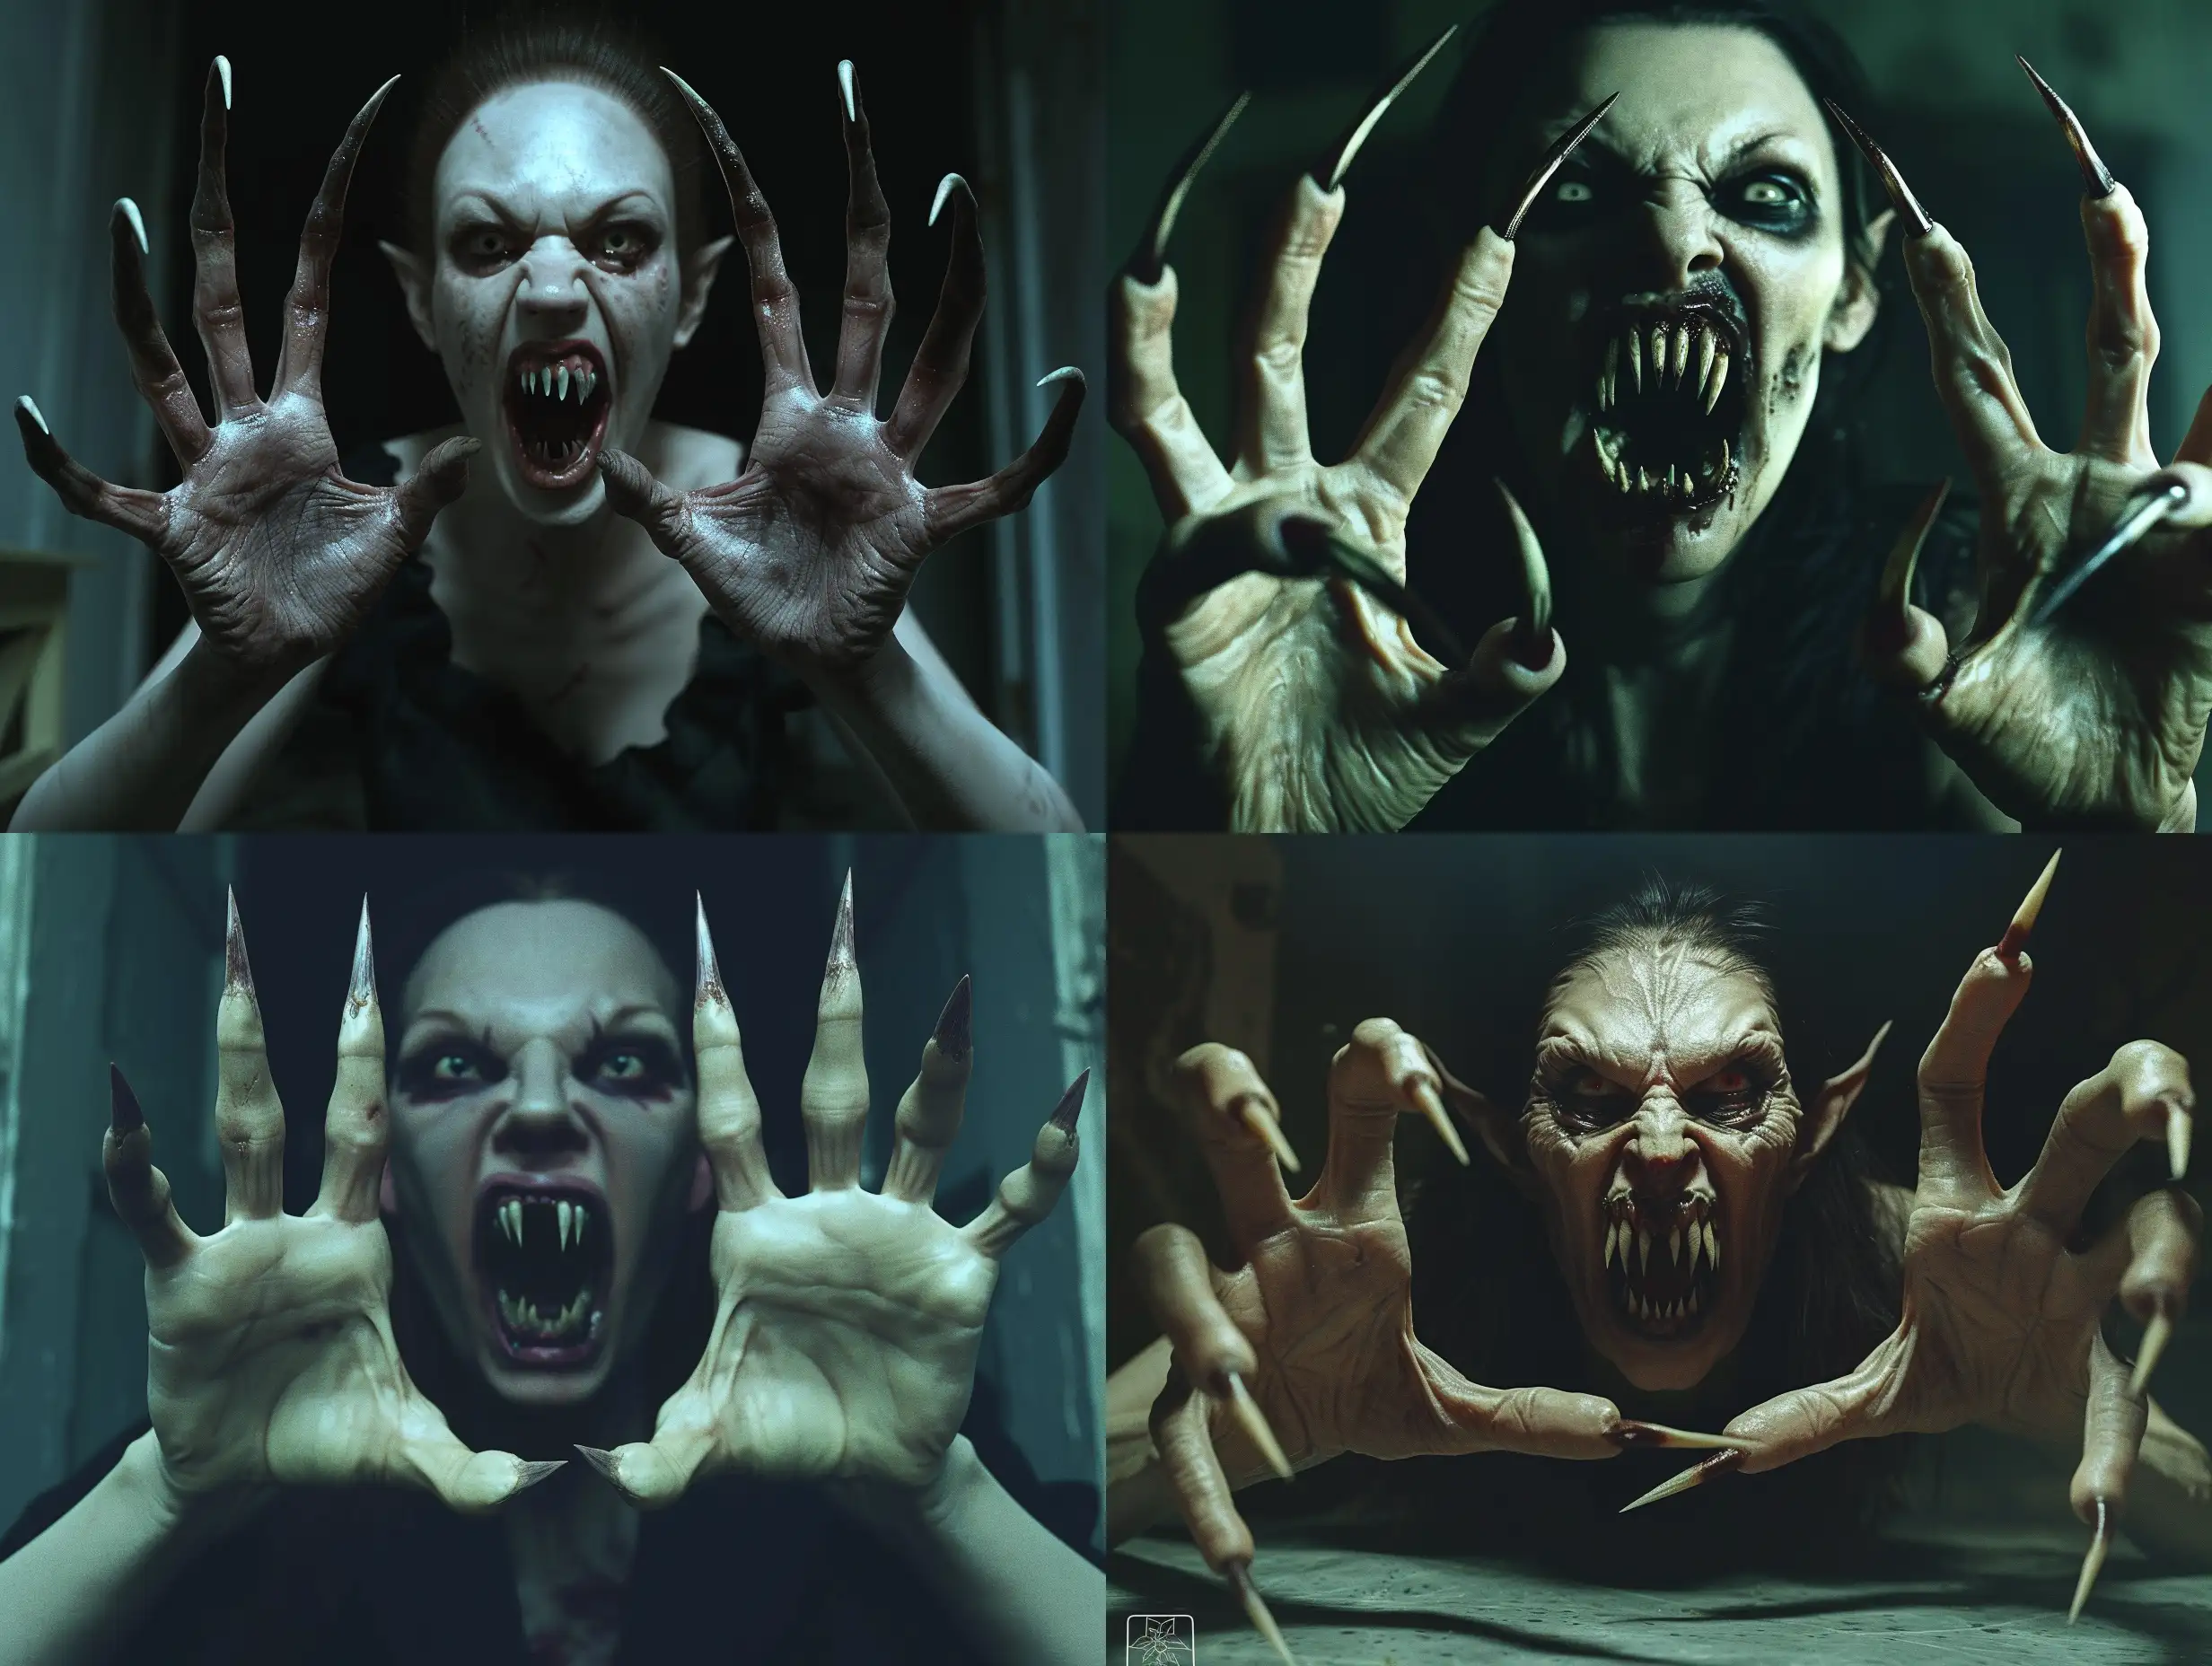 A photorealistic scene of a wild ugly monstruos vampire woman with extra long pointed fingernails, on each hands with five fingers, her mouth is threateningly open, and terrible teeth look like fangs, the vampire looks like she climbed out of the grave, her nails resemble the claws of a predators.scene inside darkness room,hyper-realism, cinematic, high detail, photo detailing, high quality, photorealistic, aggressive, dark atmosphere, realistic, the smallest details, detailed nails, horror, atmospheric lighting, full anatomical, photorealism, detailed, textured, dark, haunting, night-time scene, intense, creepy, undead, spooky, eerie, atmospheric lighting, nightmare, grotesque, terrifying, realistic anatomy, human hands, very clear without flaws with five fingers.